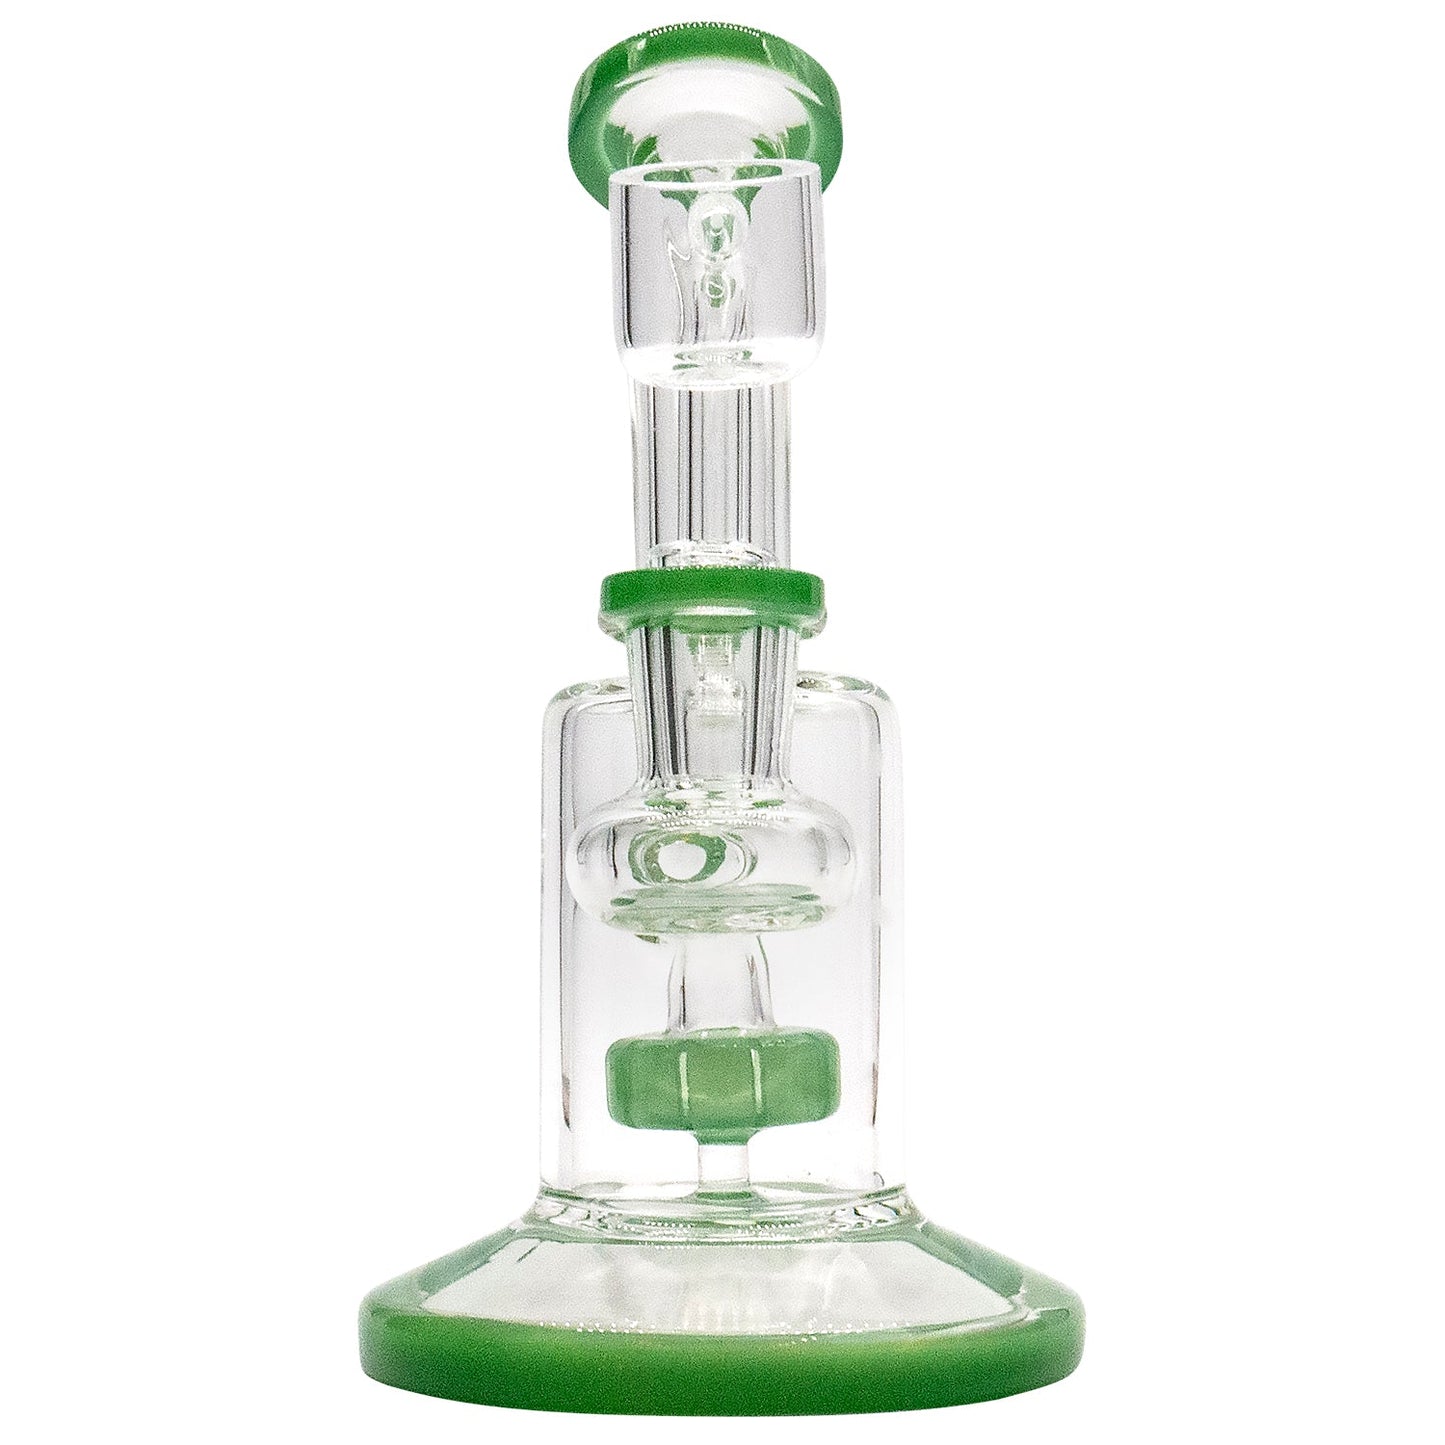 CaliConnected Showerhead Perc Mini Rig Front